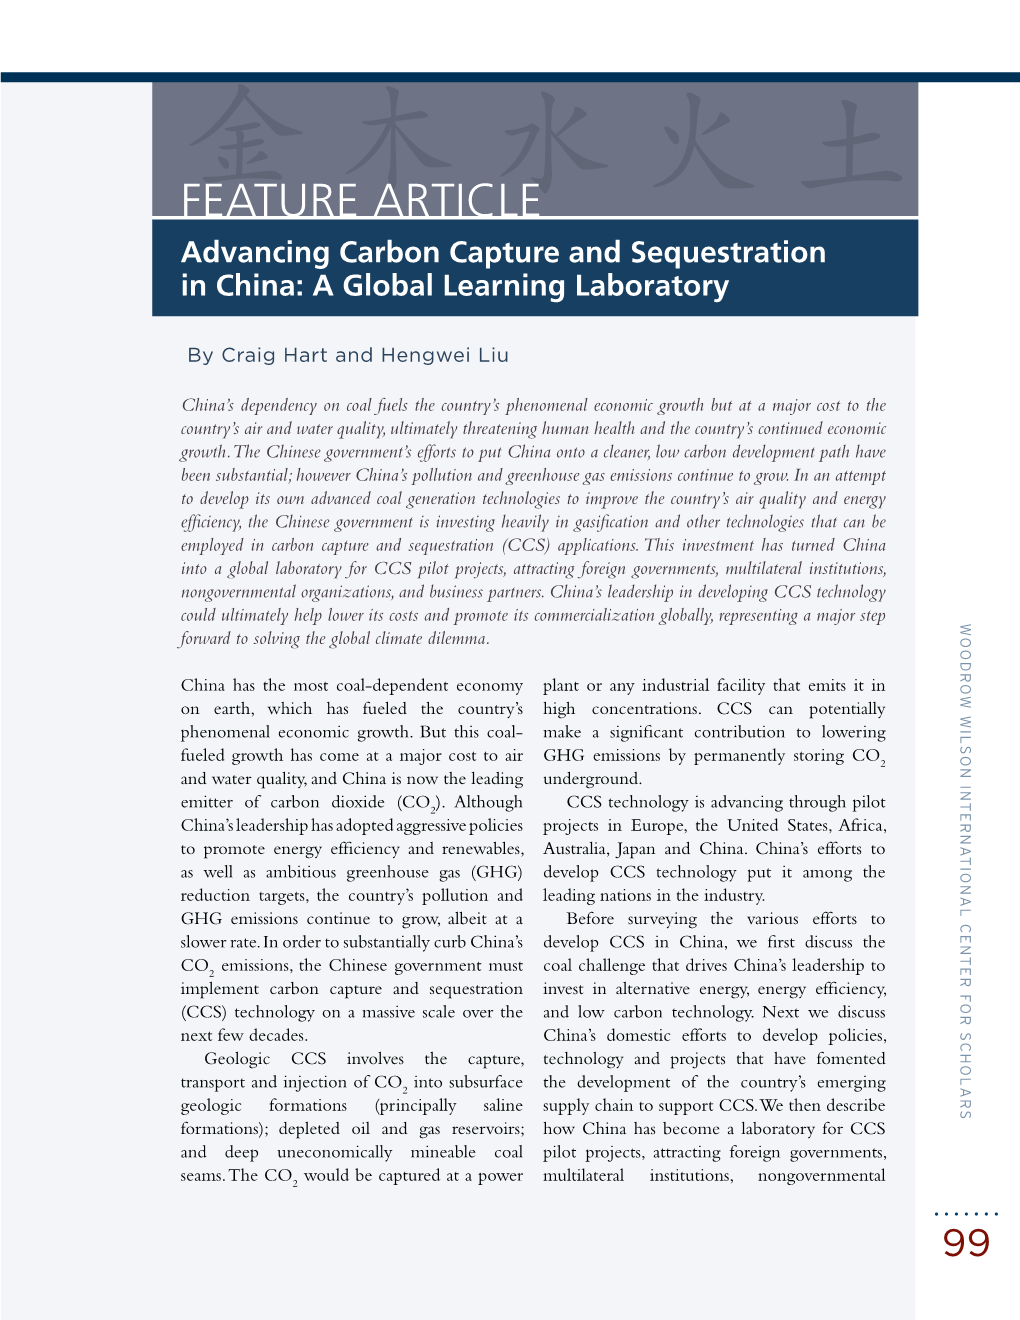 Advancing Carbon Capture and Sequestration in China: a Global Learning Laboratory